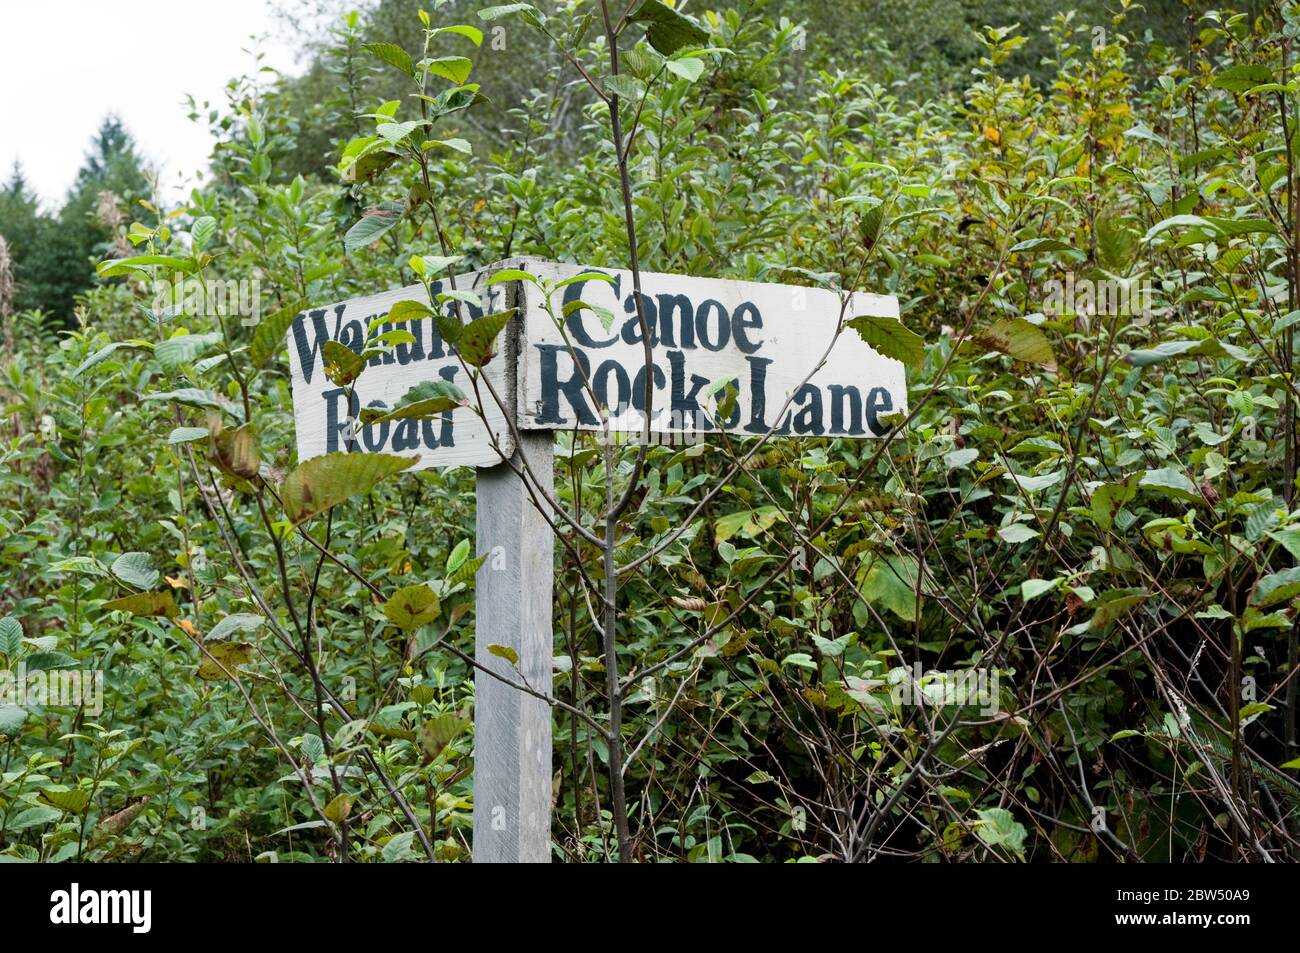 Homemade street signs on a road in the indigenous First Nation village of Wuikinuxv in the Great Bear Rainforest, British Columbia, Canada. Stock Photo